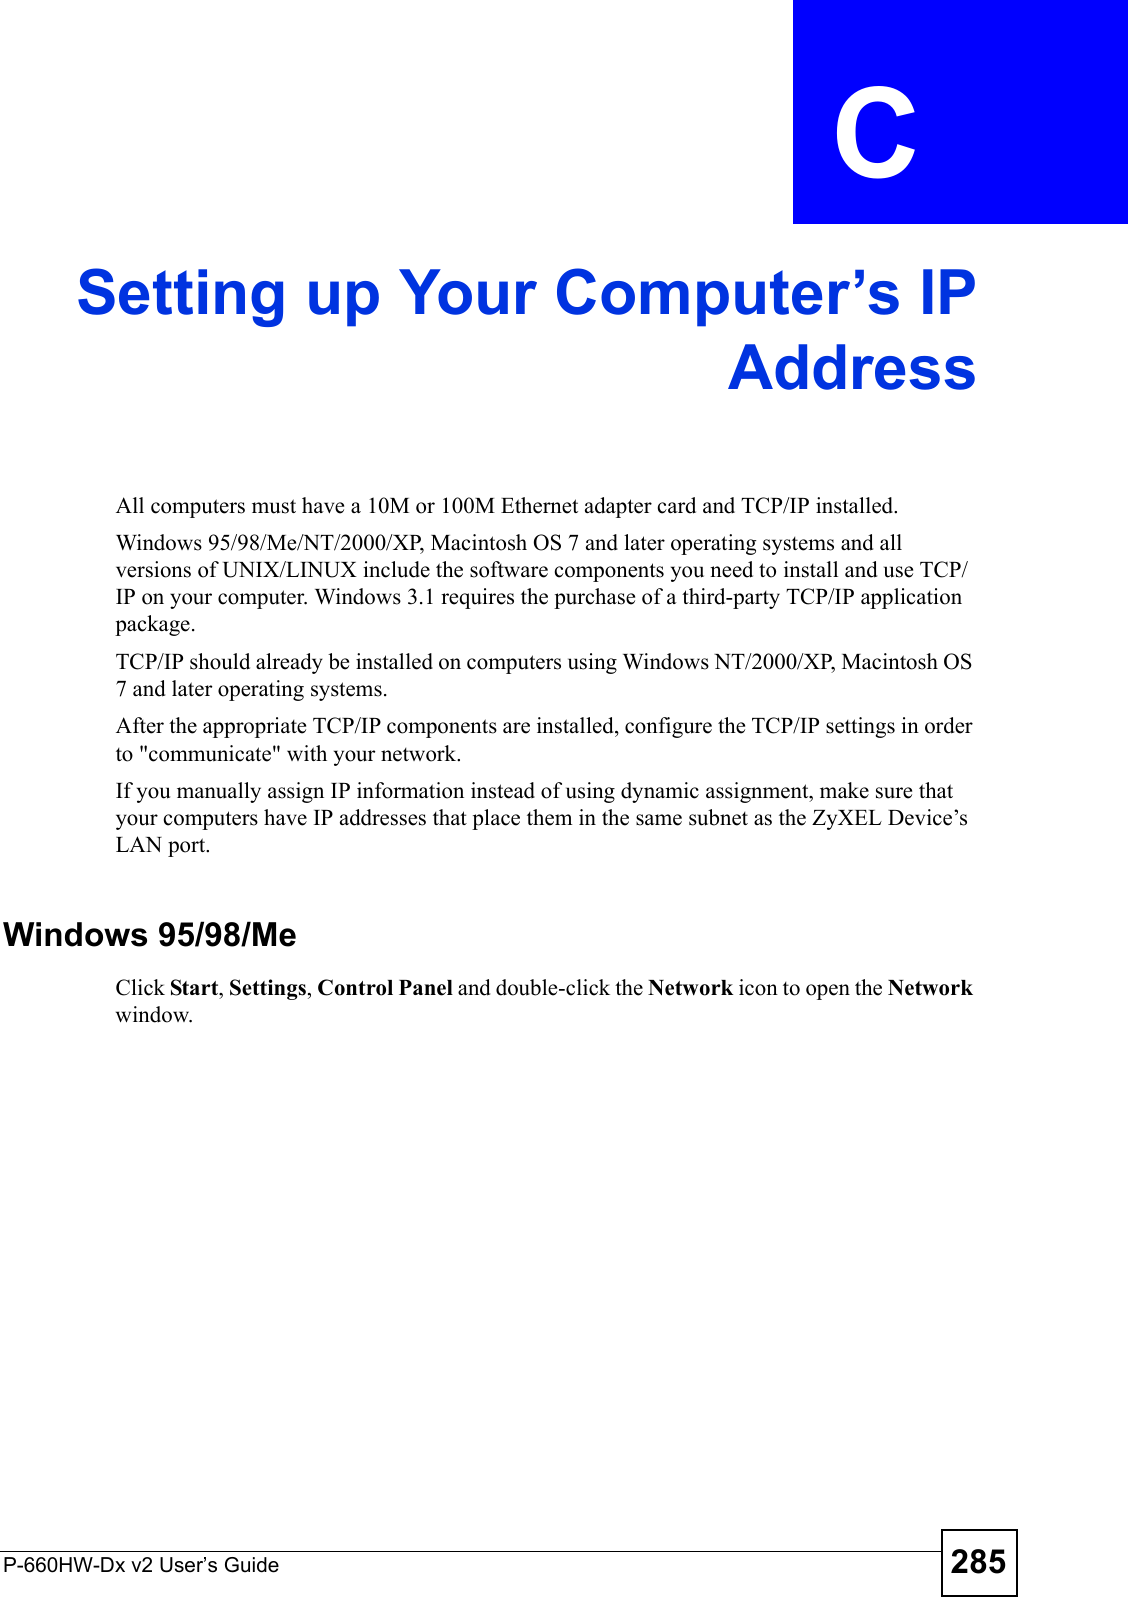 P-660HW-Dx v2 User’s Guide 285APPENDIX  C Setting up Your Computer’s IPAddressAll computers must have a 10M or 100M Ethernet adapter card and TCP/IP installed. Windows 95/98/Me/NT/2000/XP, Macintosh OS 7 and later operating systems and all versions of UNIX/LINUX include the software components you need to install and use TCP/IP on your computer. Windows 3.1 requires the purchase of a third-party TCP/IP application package.TCP/IP should already be installed on computers using Windows NT/2000/XP, Macintosh OS 7 and later operating systems.After the appropriate TCP/IP components are installed, configure the TCP/IP settings in order to &quot;communicate&quot; with your network. If you manually assign IP information instead of using dynamic assignment, make sure that your computers have IP addresses that place them in the same subnet as the ZyXEL Device’s LAN port.Windows 95/98/MeClick Start, Settings, Control Panel and double-click the Network icon to open the Network window.